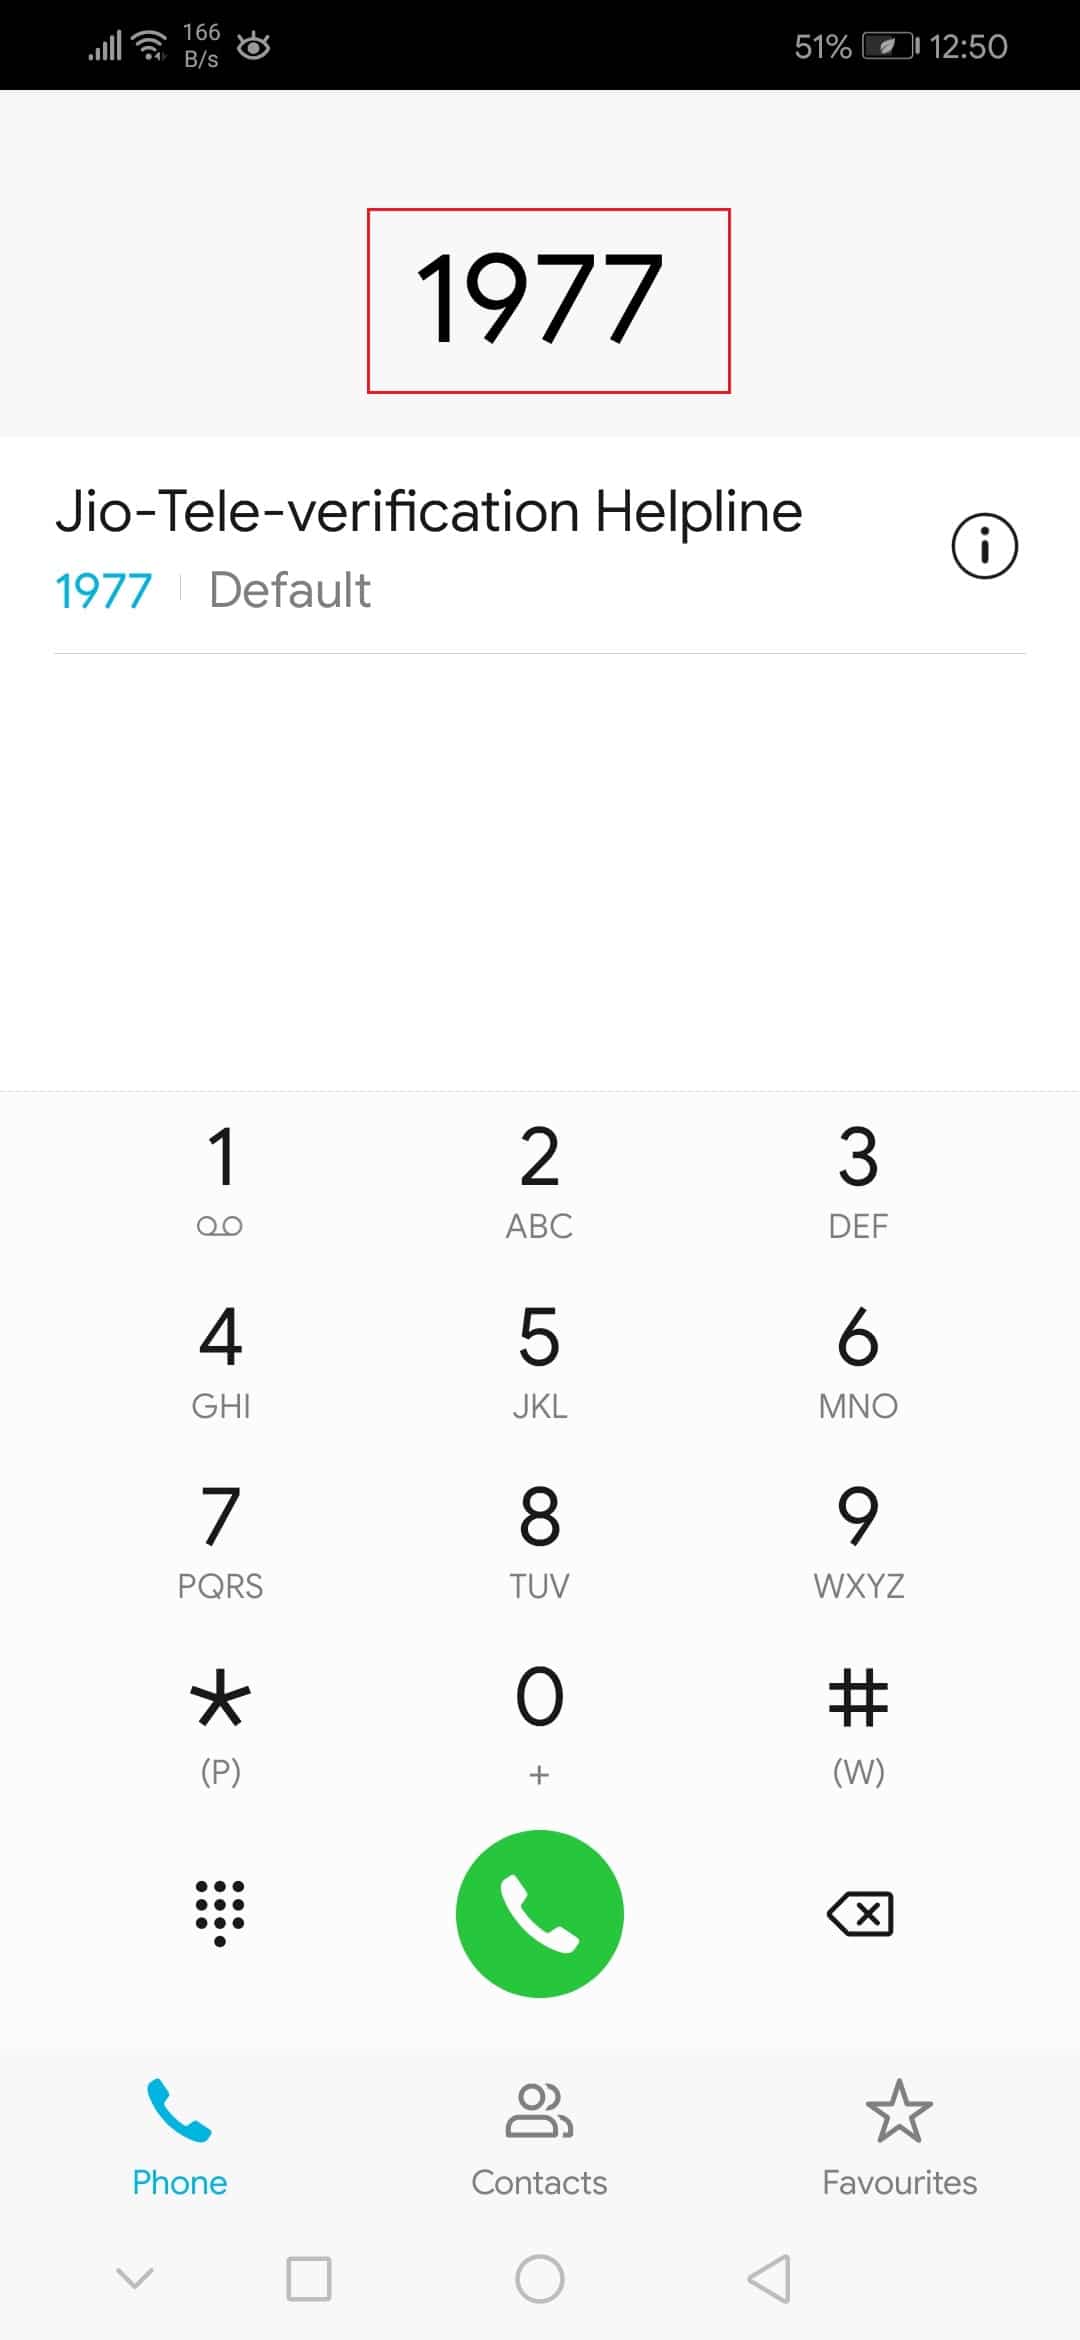 dial 1977 to tele verify Jio SIM in Android phone